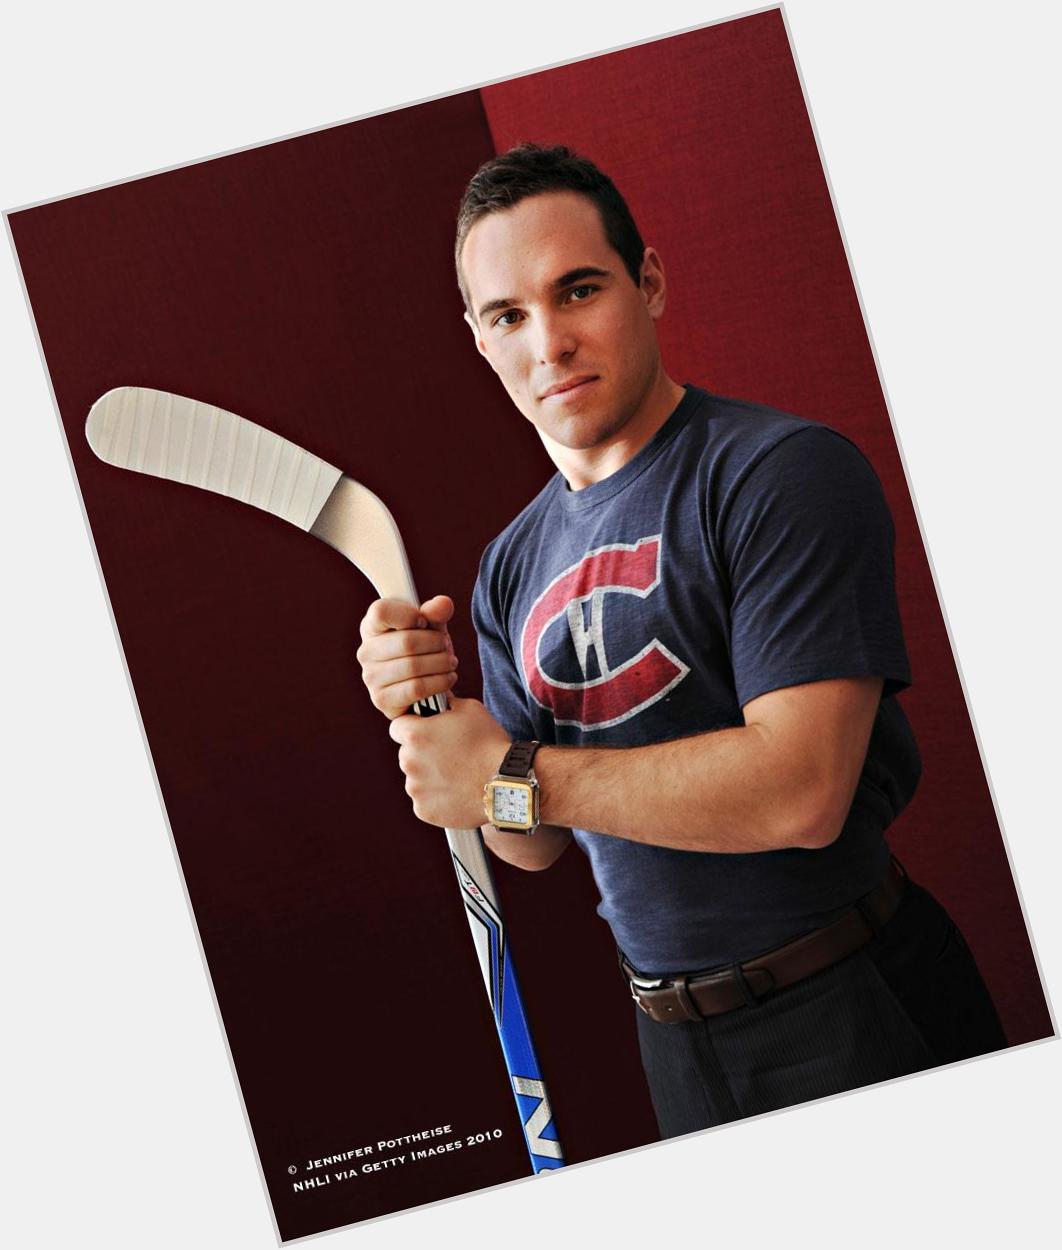 Happy 33rd birthday to Michael Cammalleri, who played 196 games with from 2009-12 